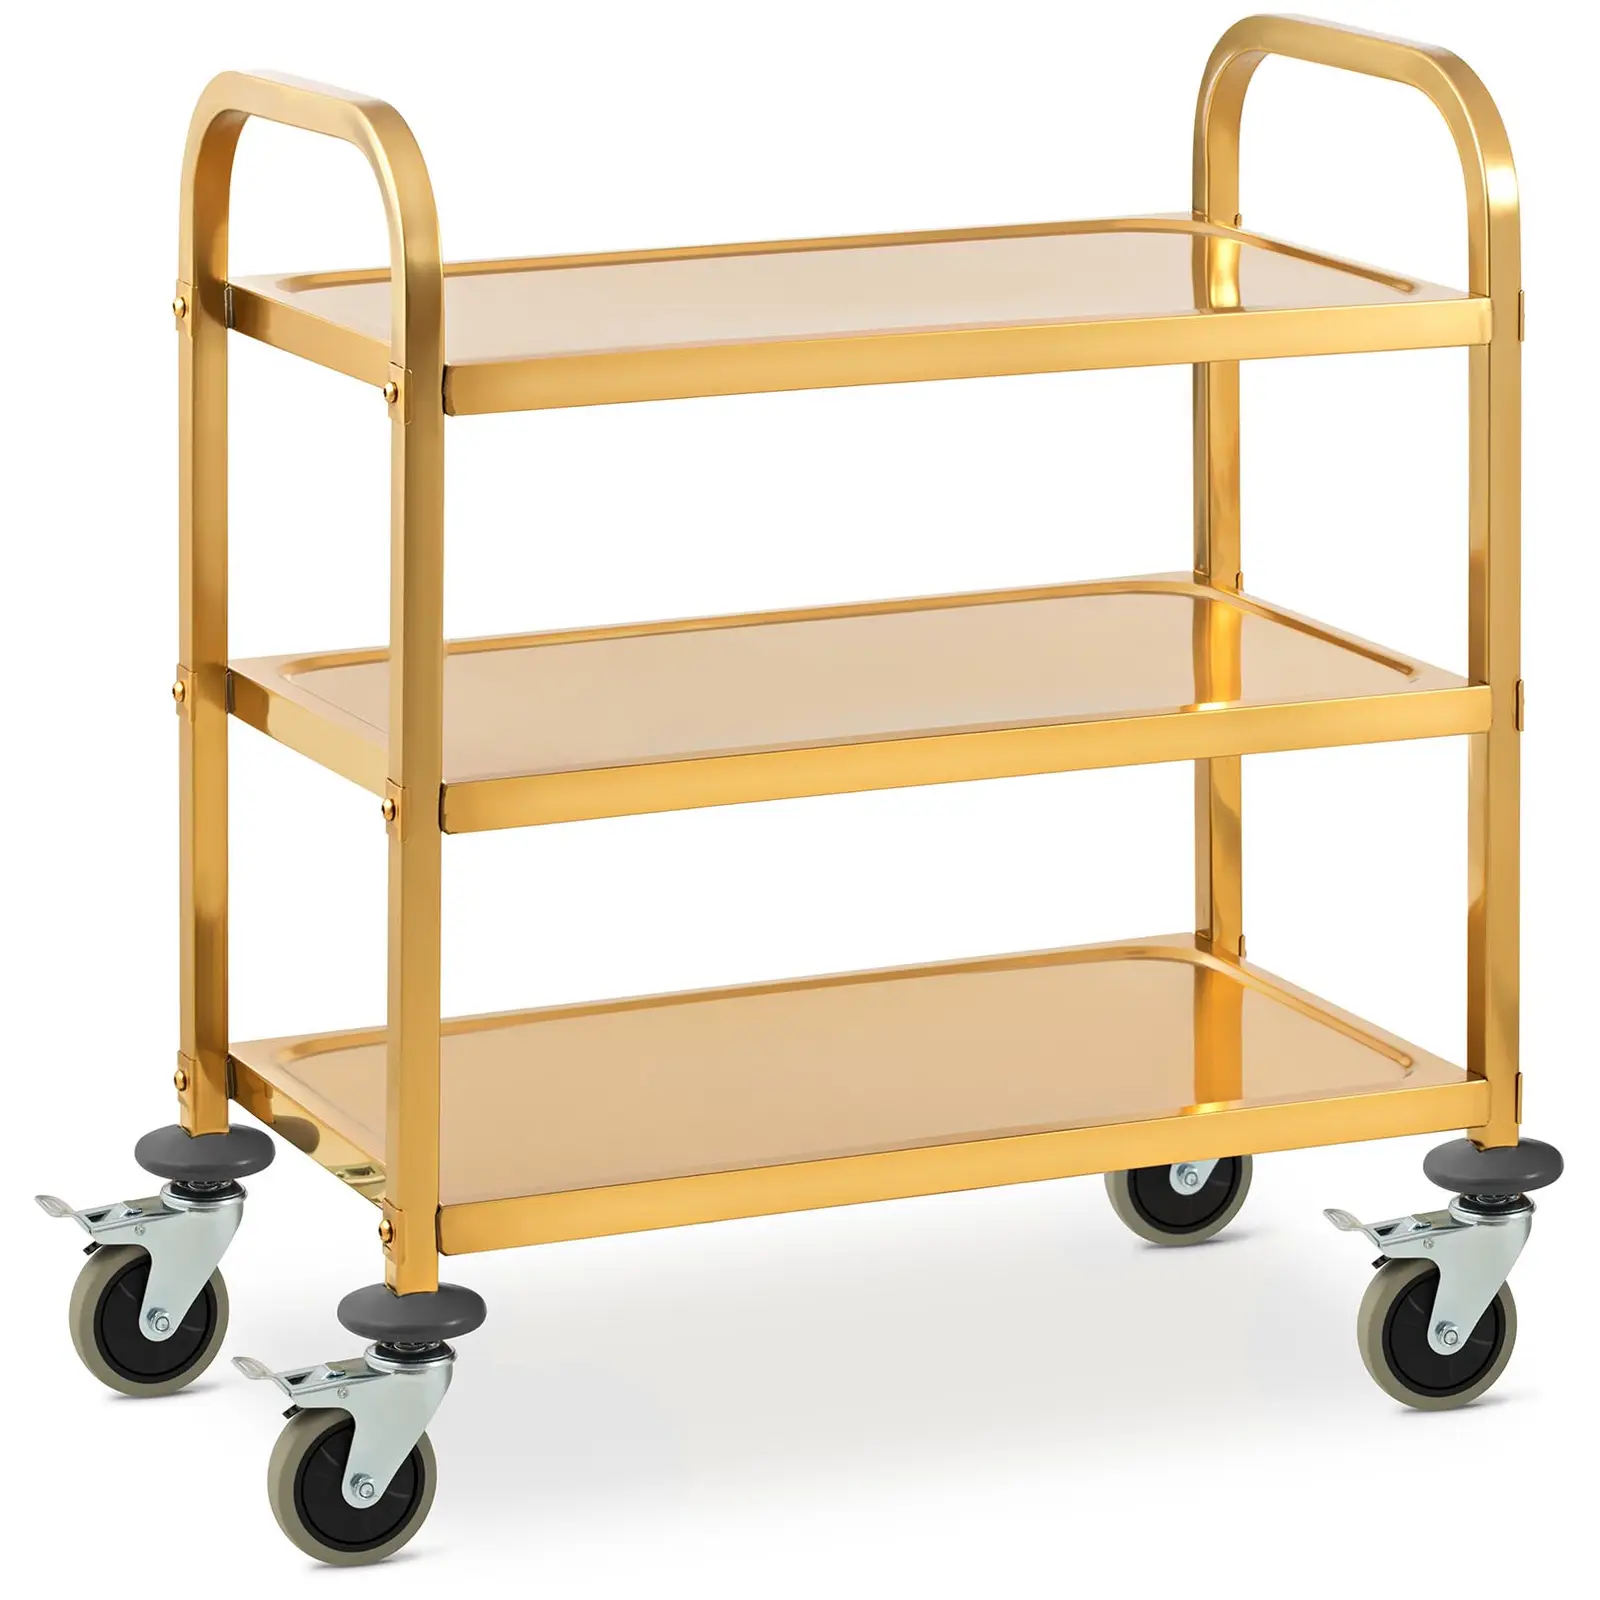 Service Trolley - 3 shelves - Royal Catering - up to 240 kg - shelves: 69 x 40 cm